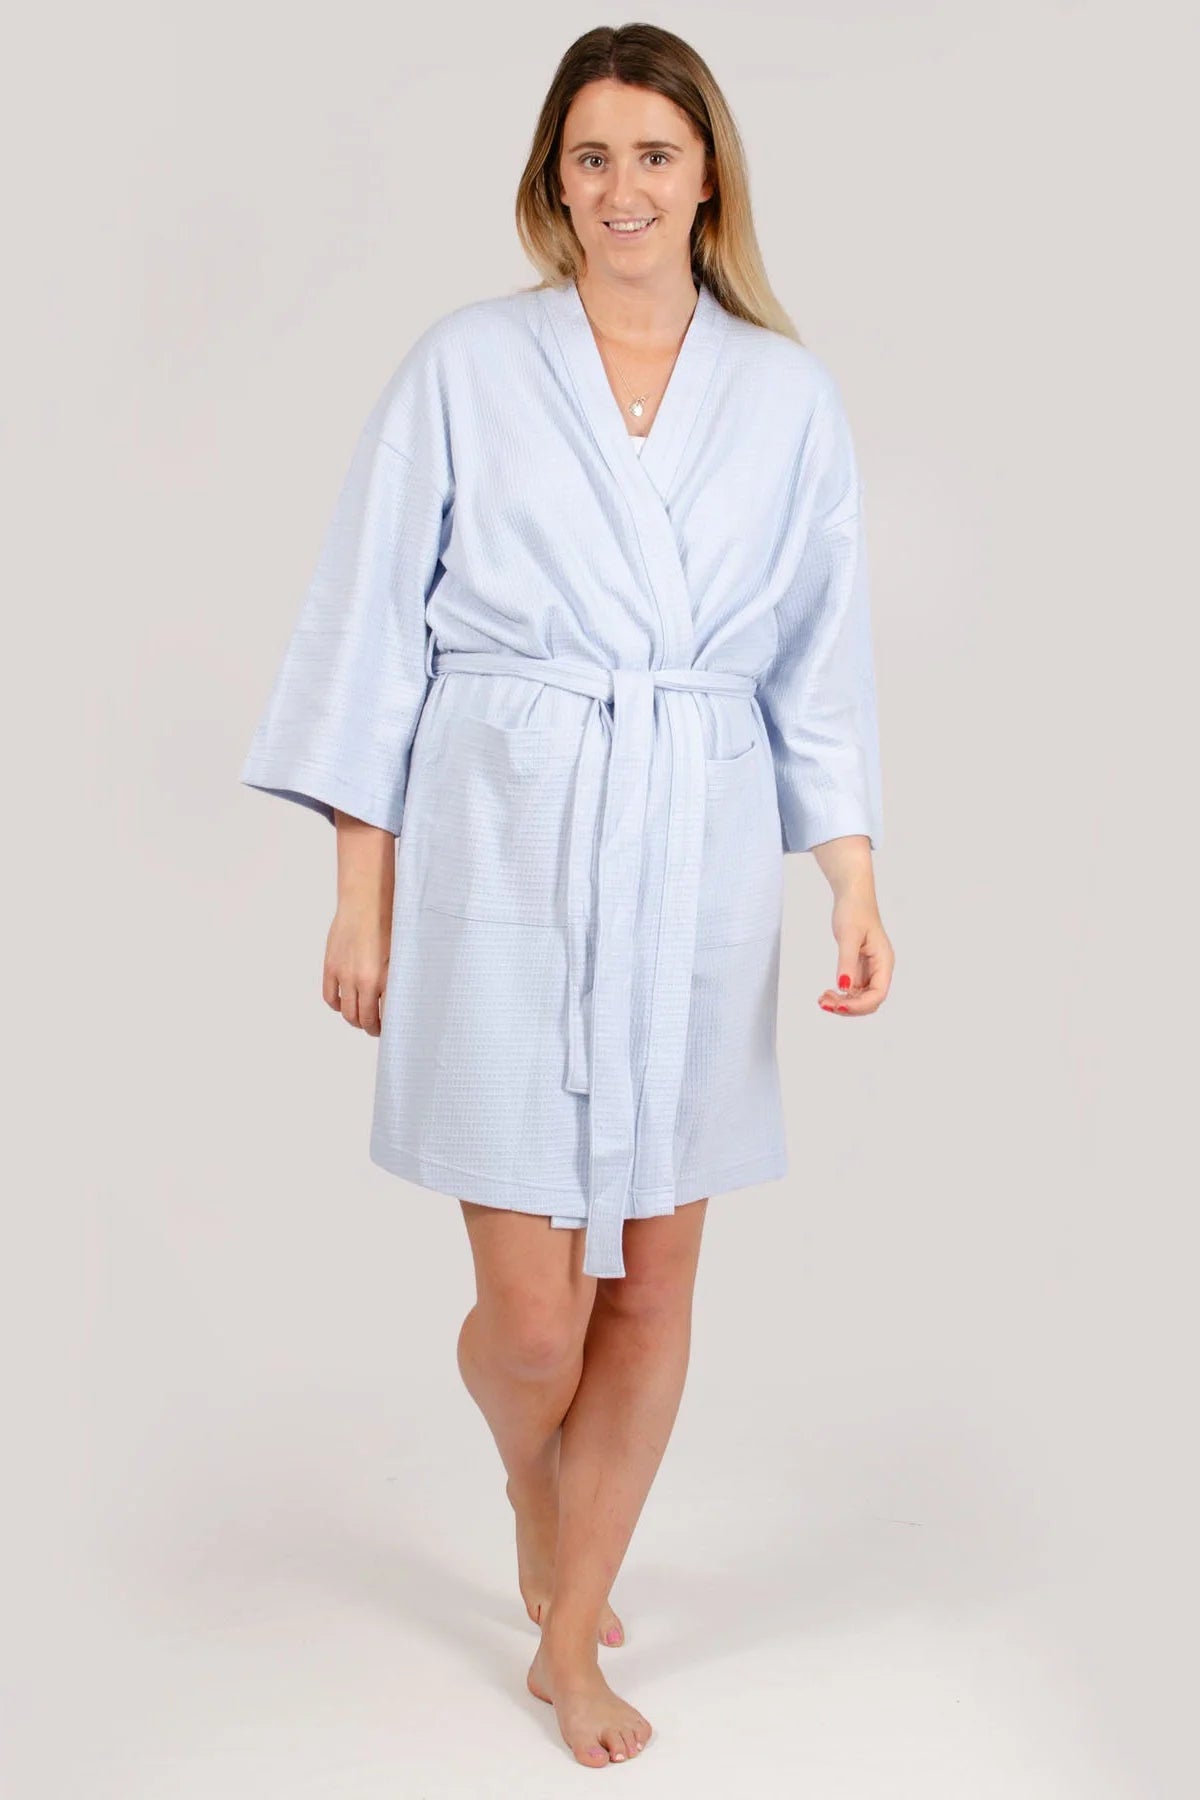 TED BAKER GIRLS Plush Dressing Gown- Age 13/14 £16.99 - PicClick UK